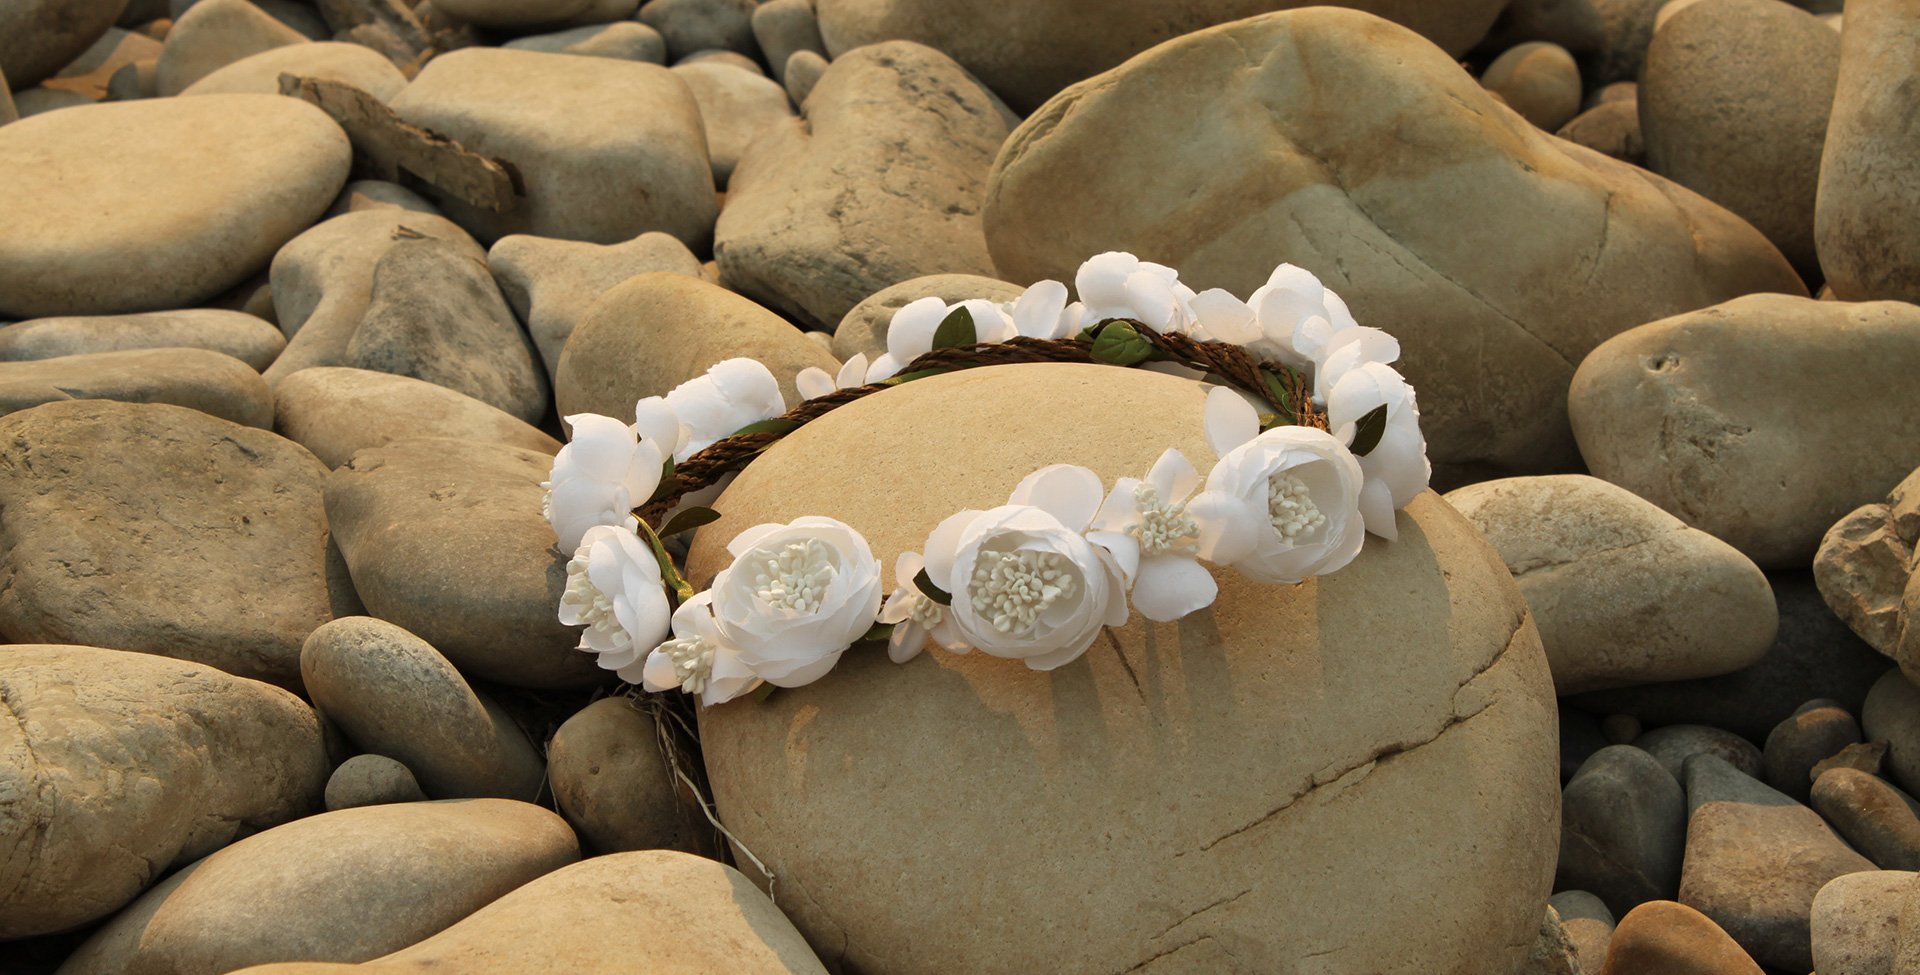 Pure white roses tied together in a bridal headband are placed amongst smooth cobbles and stones.